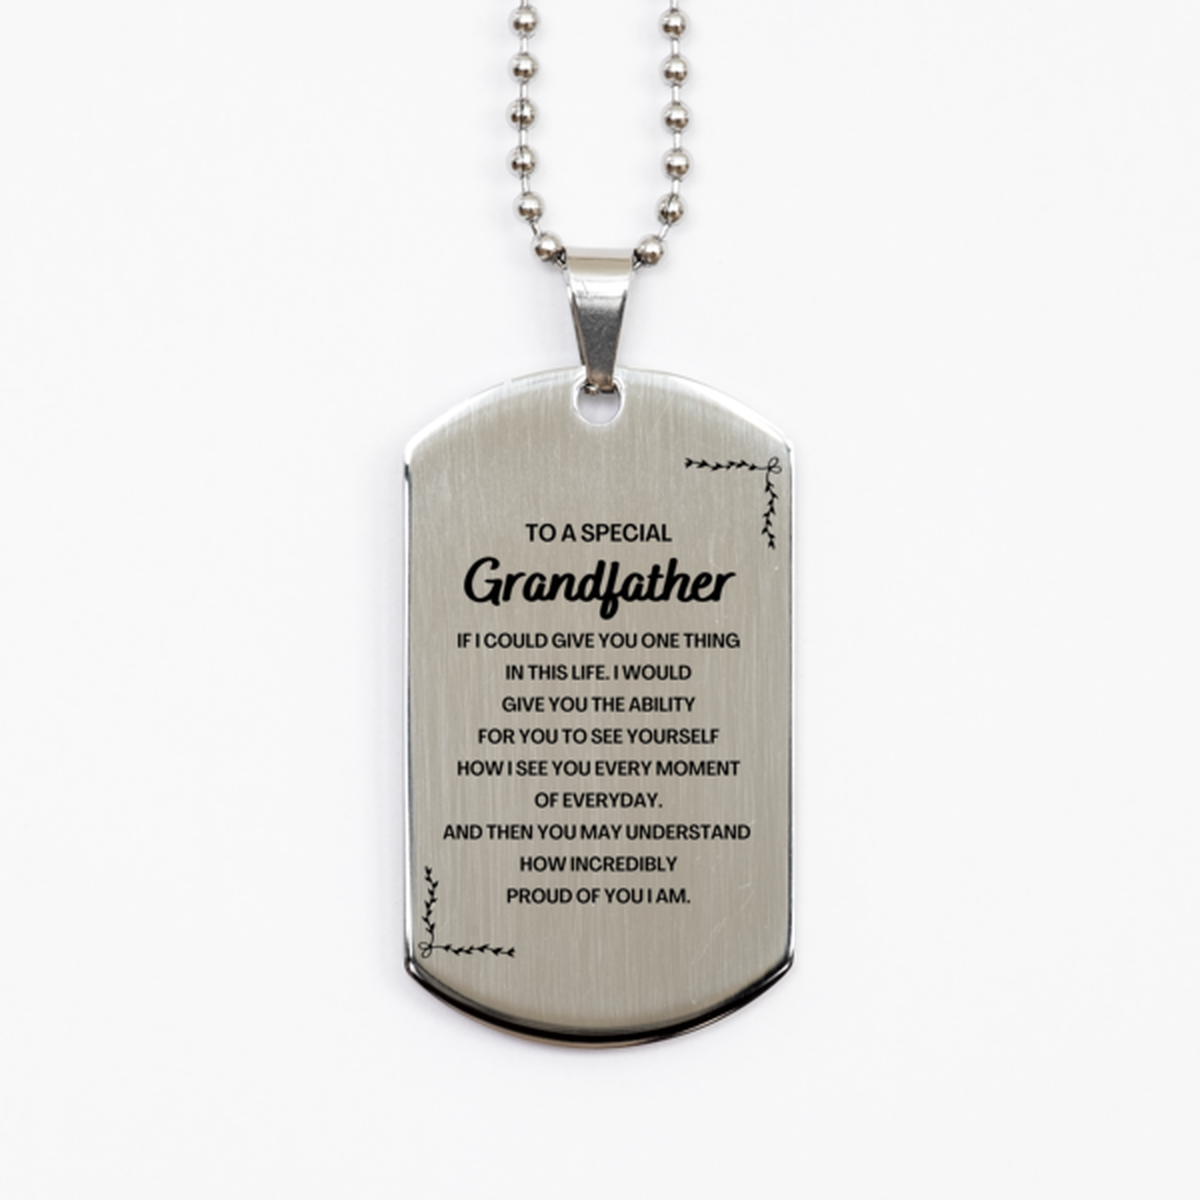 To My Grandfather Silver Dog Tag, Gifts For Grandfather Engraved, Inspirational Gifts for Christmas Birthday, Epic Gifts for Grandfather To A Special Grandfather how incredibly proud of you I am